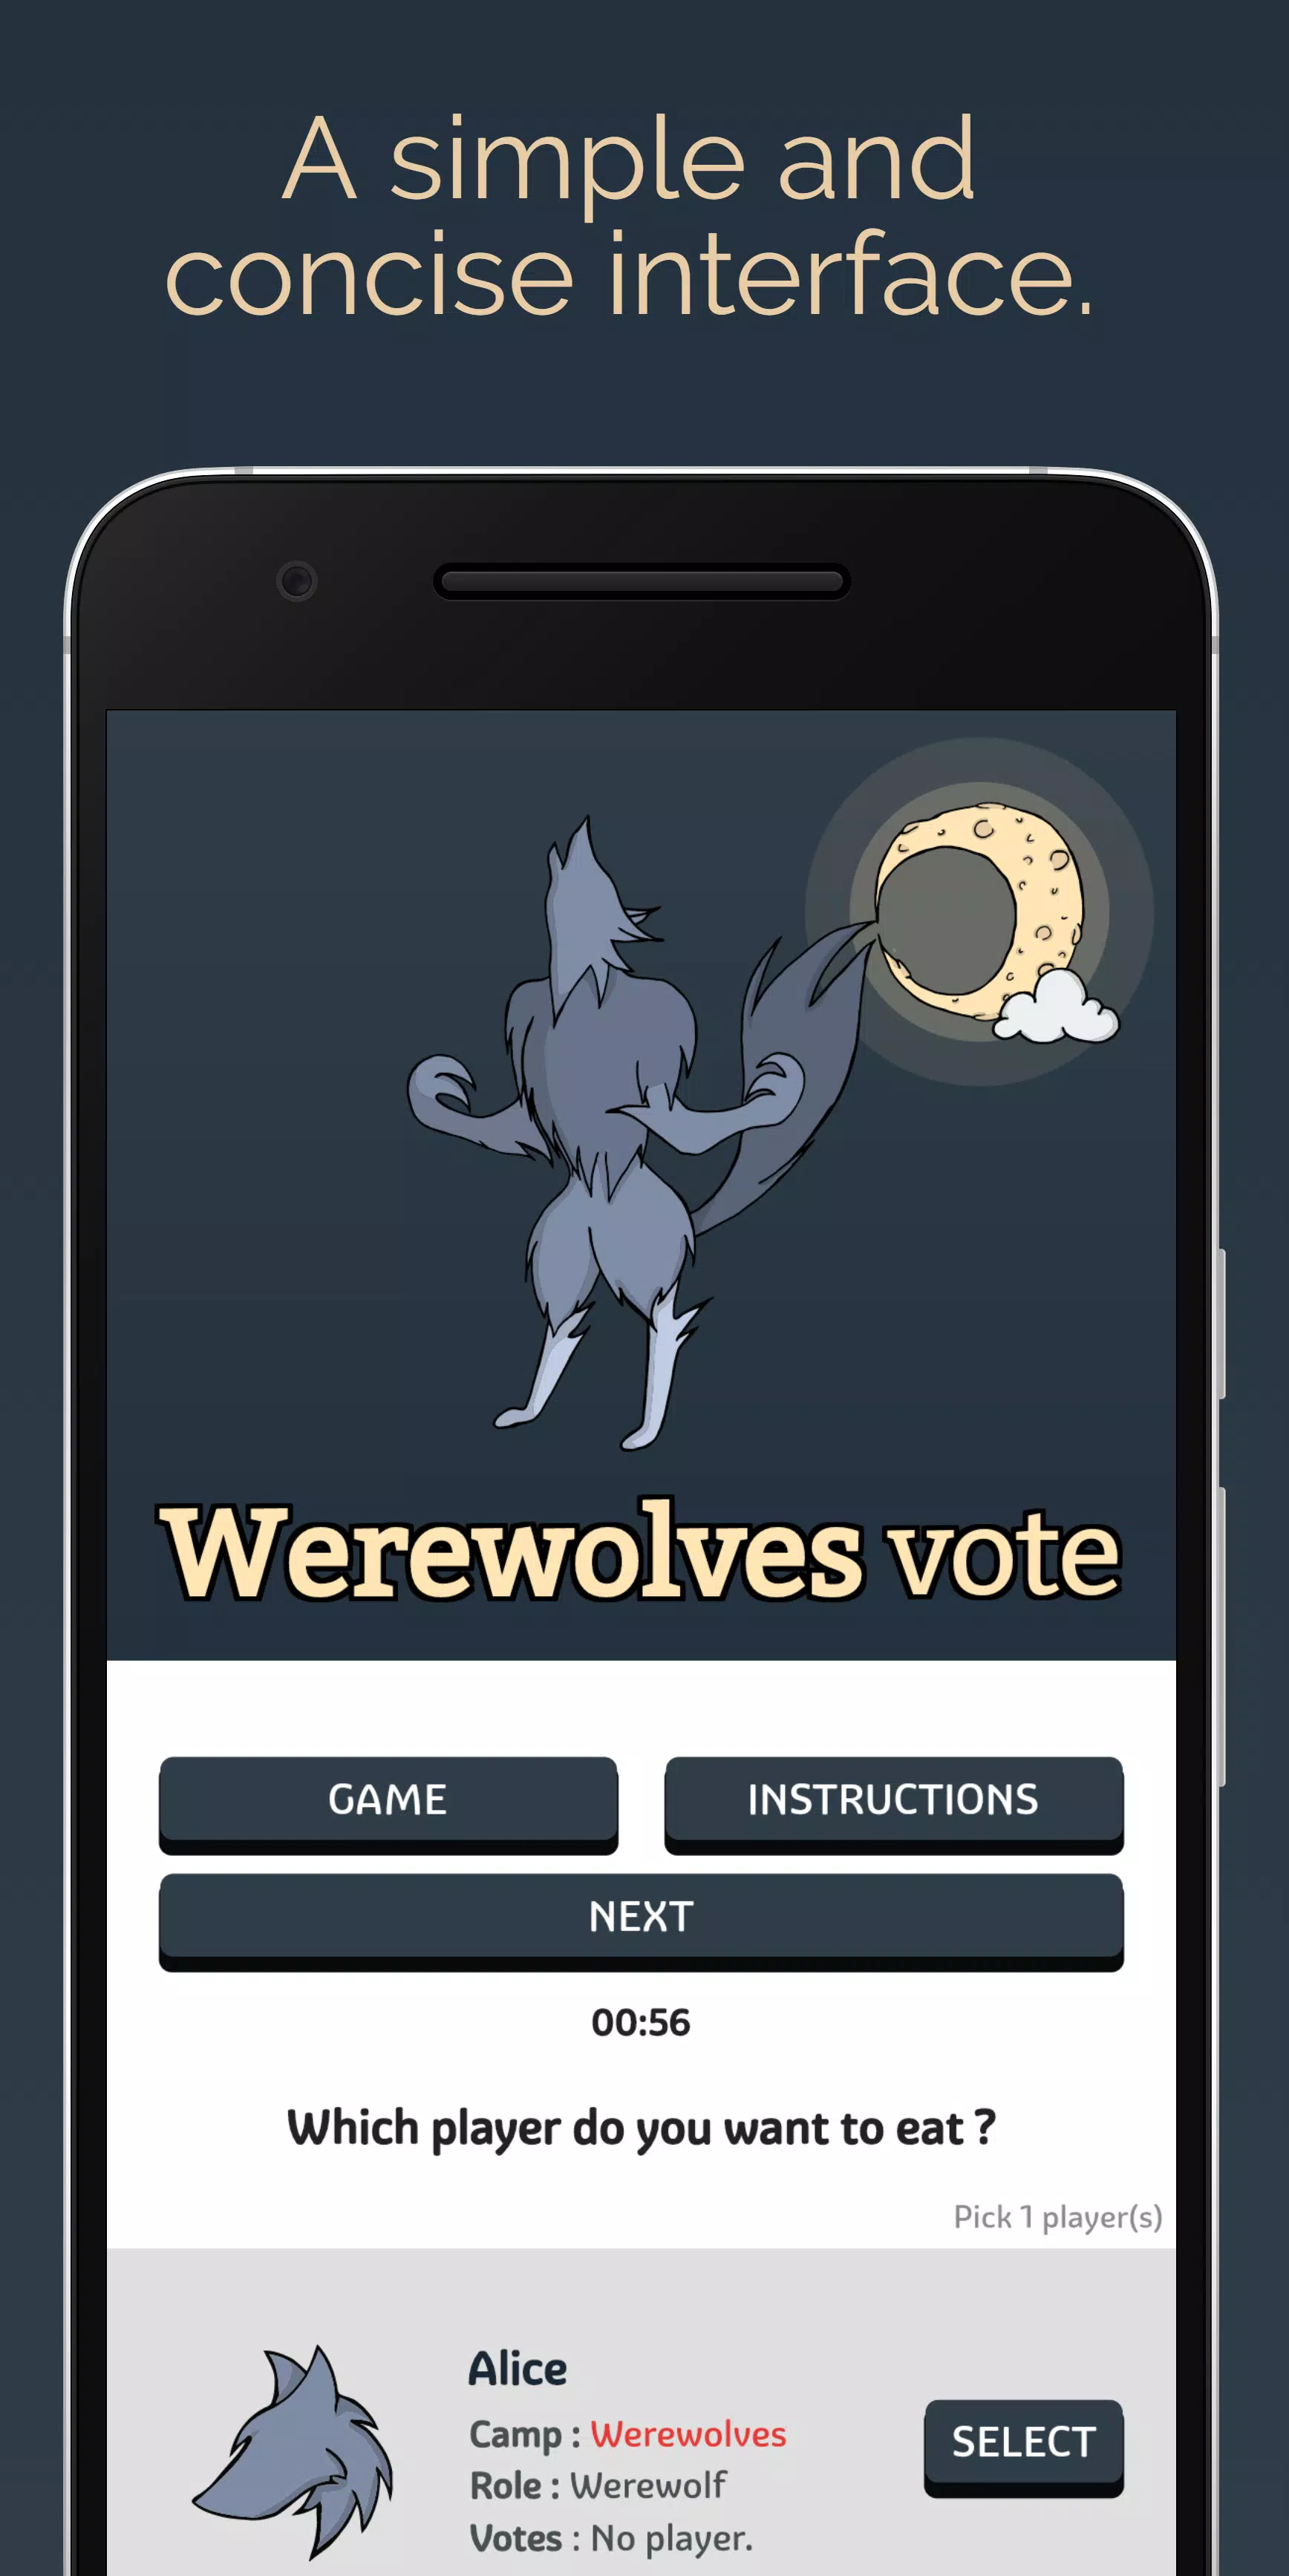 How to Play Werewolf in Telegram on iPhone: An Easy Guide